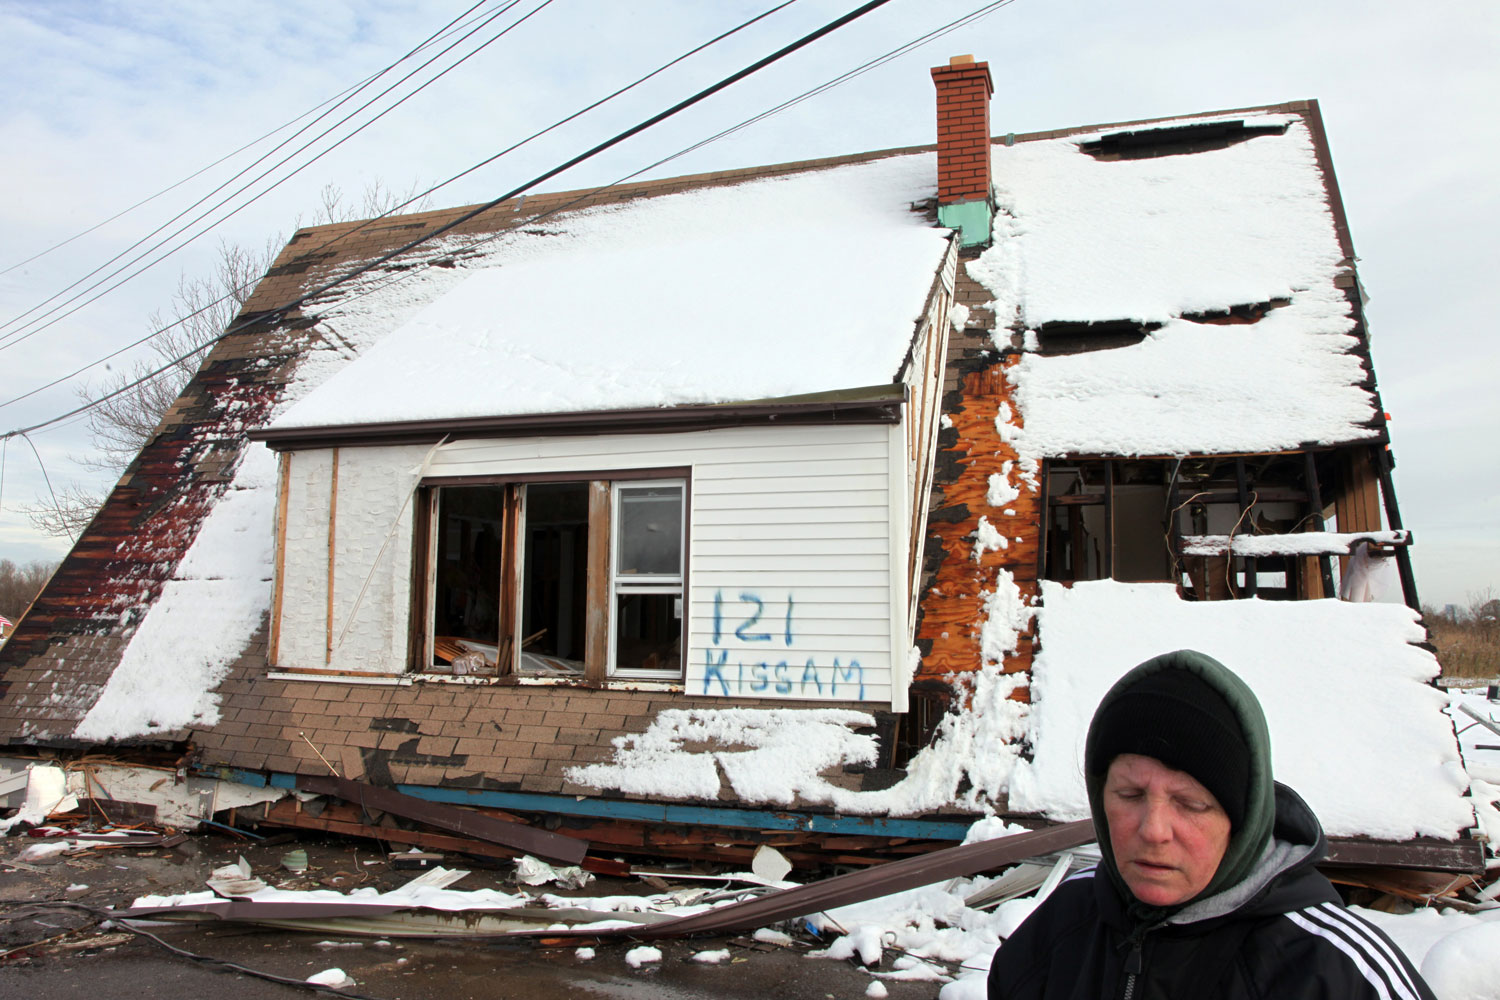 Image: Jane Caravello, who lost her home on Kissam Avenue, spray-painted street numbers onto the remains of her house and her neighbors' homes, to aid insurance adjustors with property damage assessment. Thirteen houses were ripped from their foundations on this block.